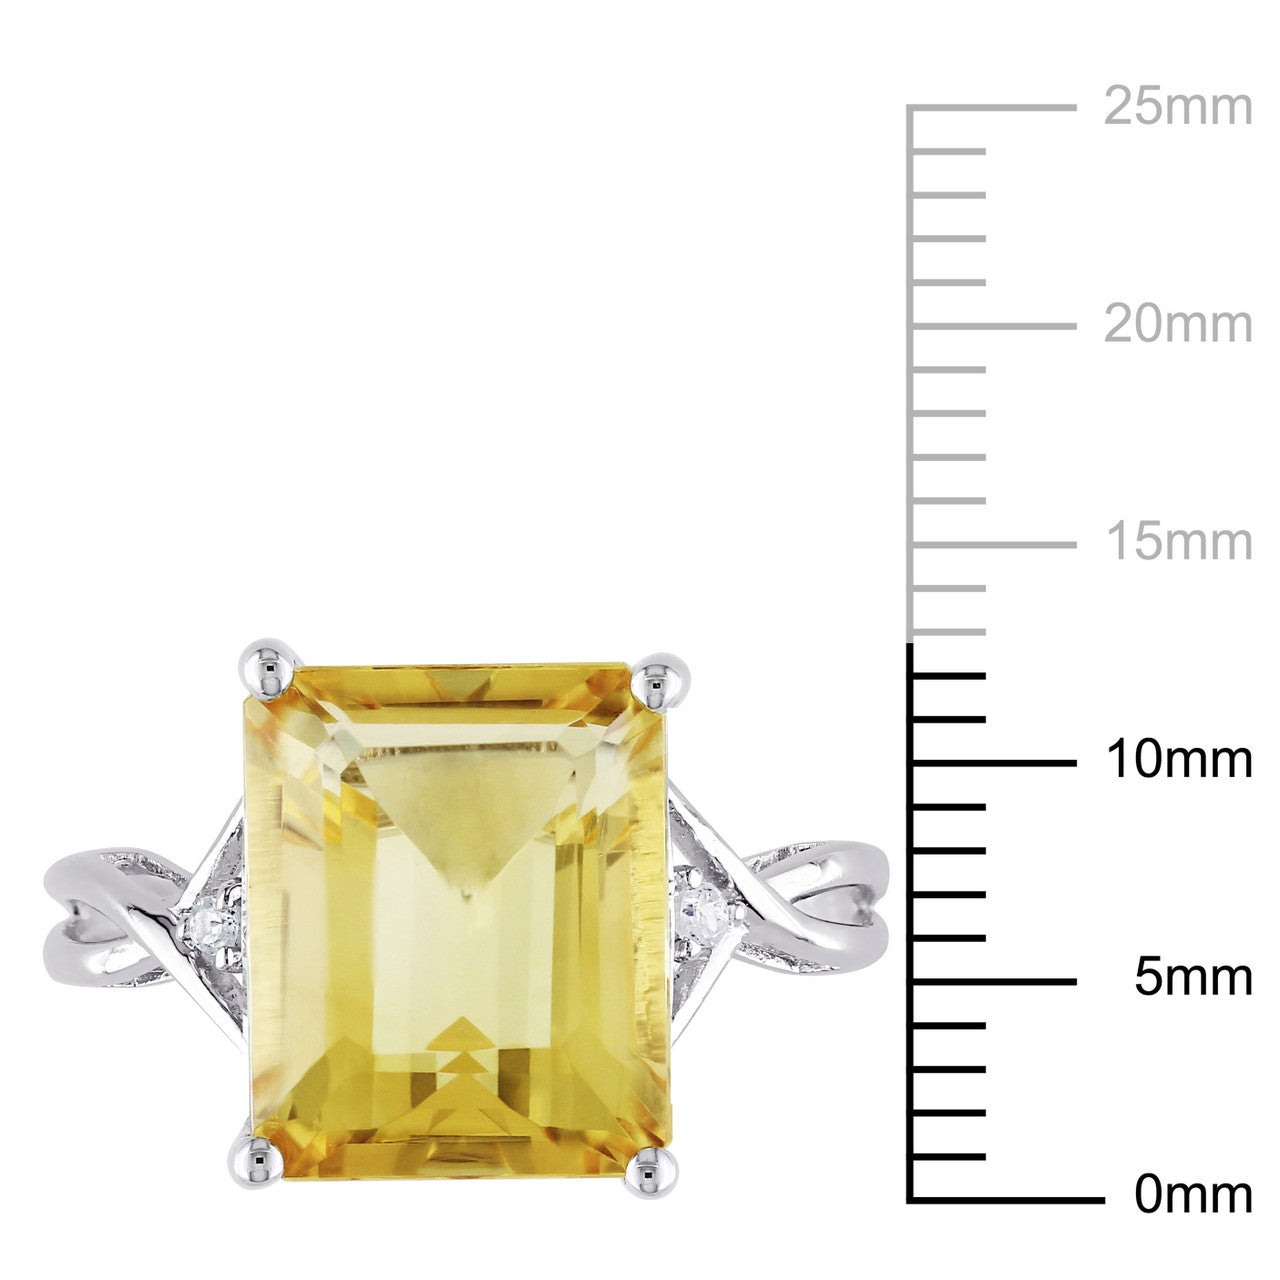 Ice Jewellery Citrine & White Topaz Cocktail Ring in Sterling Silver - 7500696191 | Ice Jewellery Australia